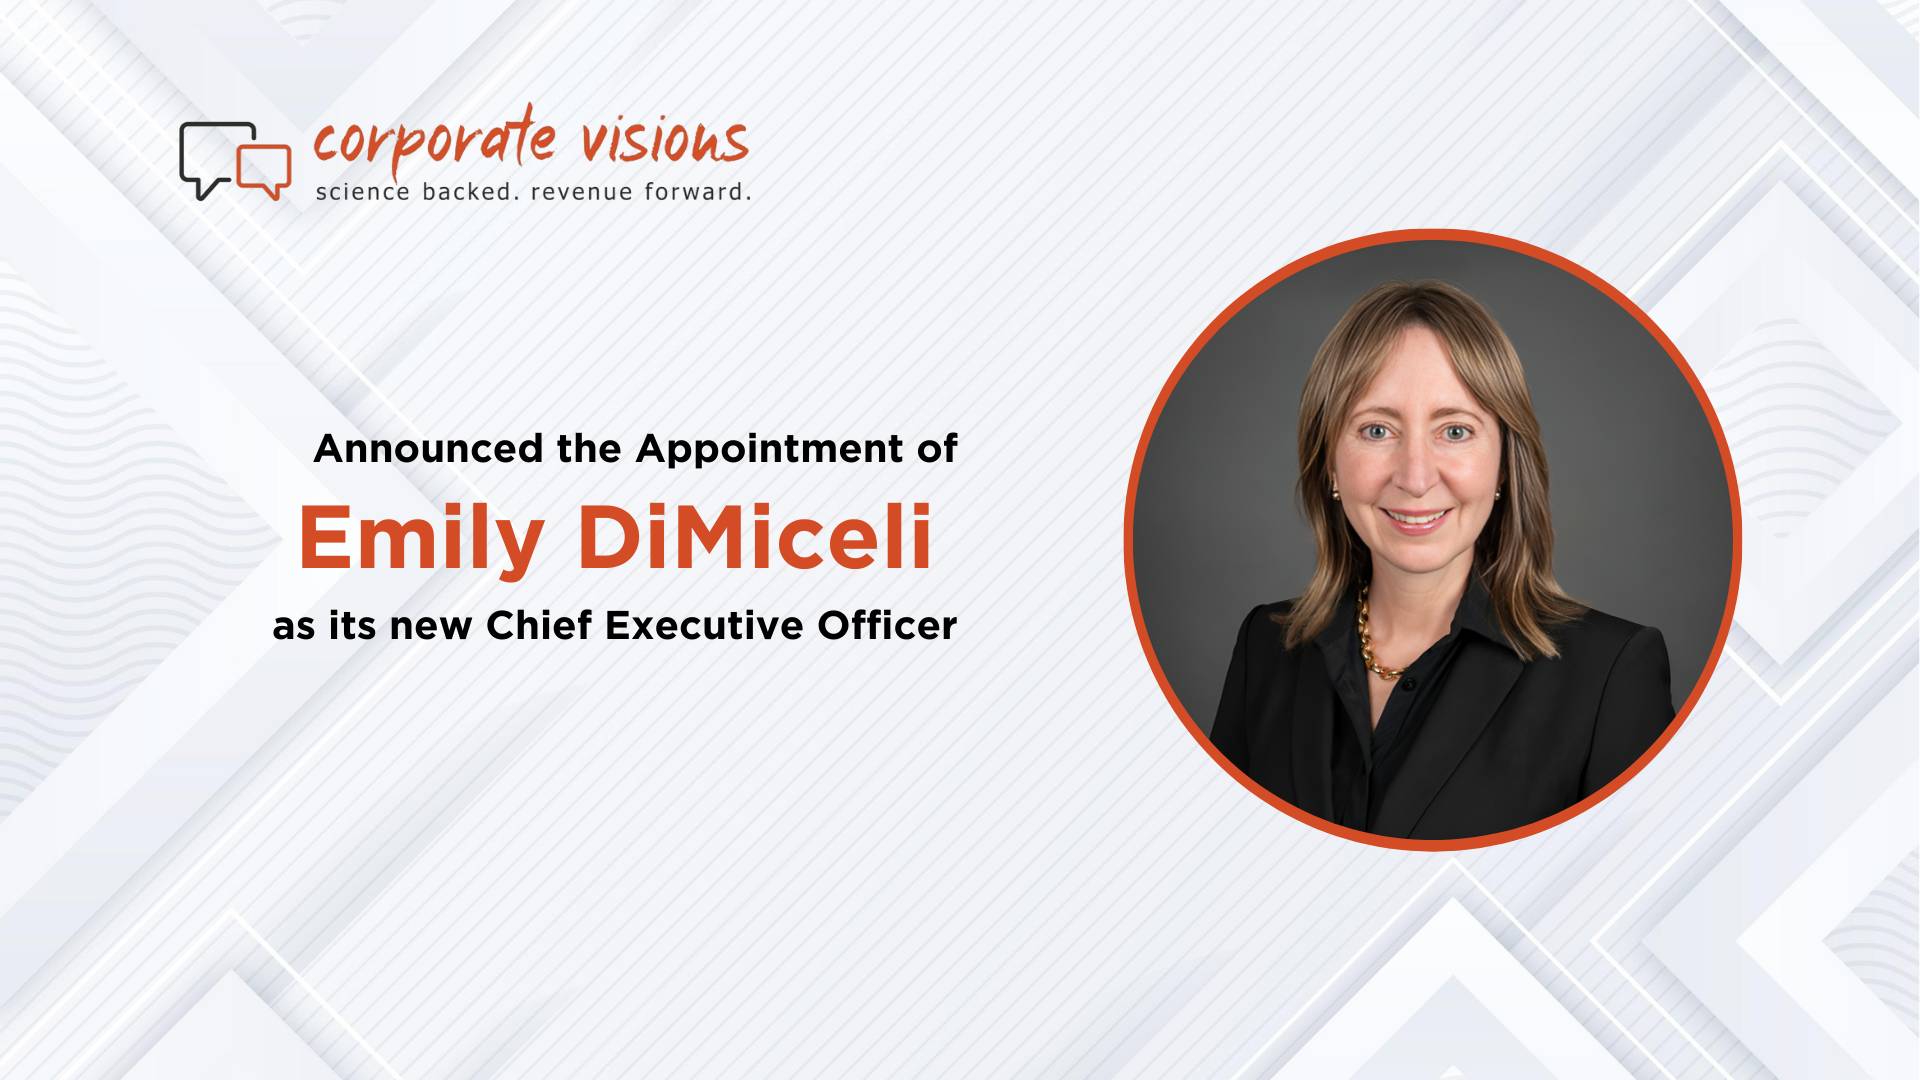 Emily DiMiceli Named New CEO of Corporate Visions